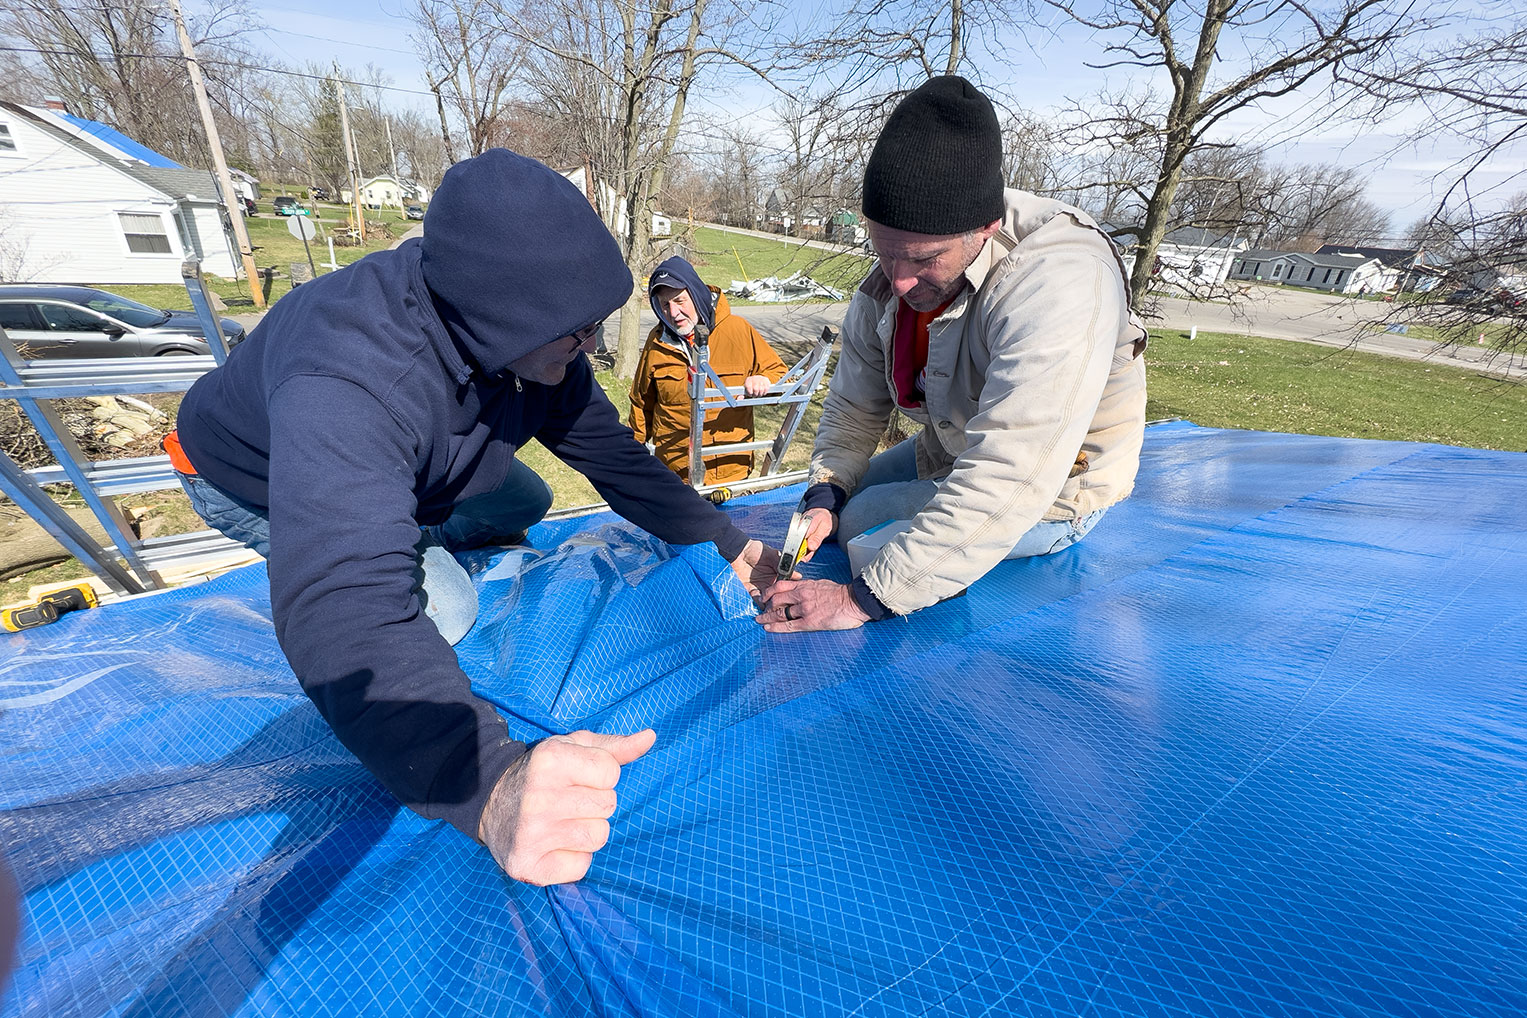 Volunteers tarp a damaged roof to protect the home from the elements and further damage.